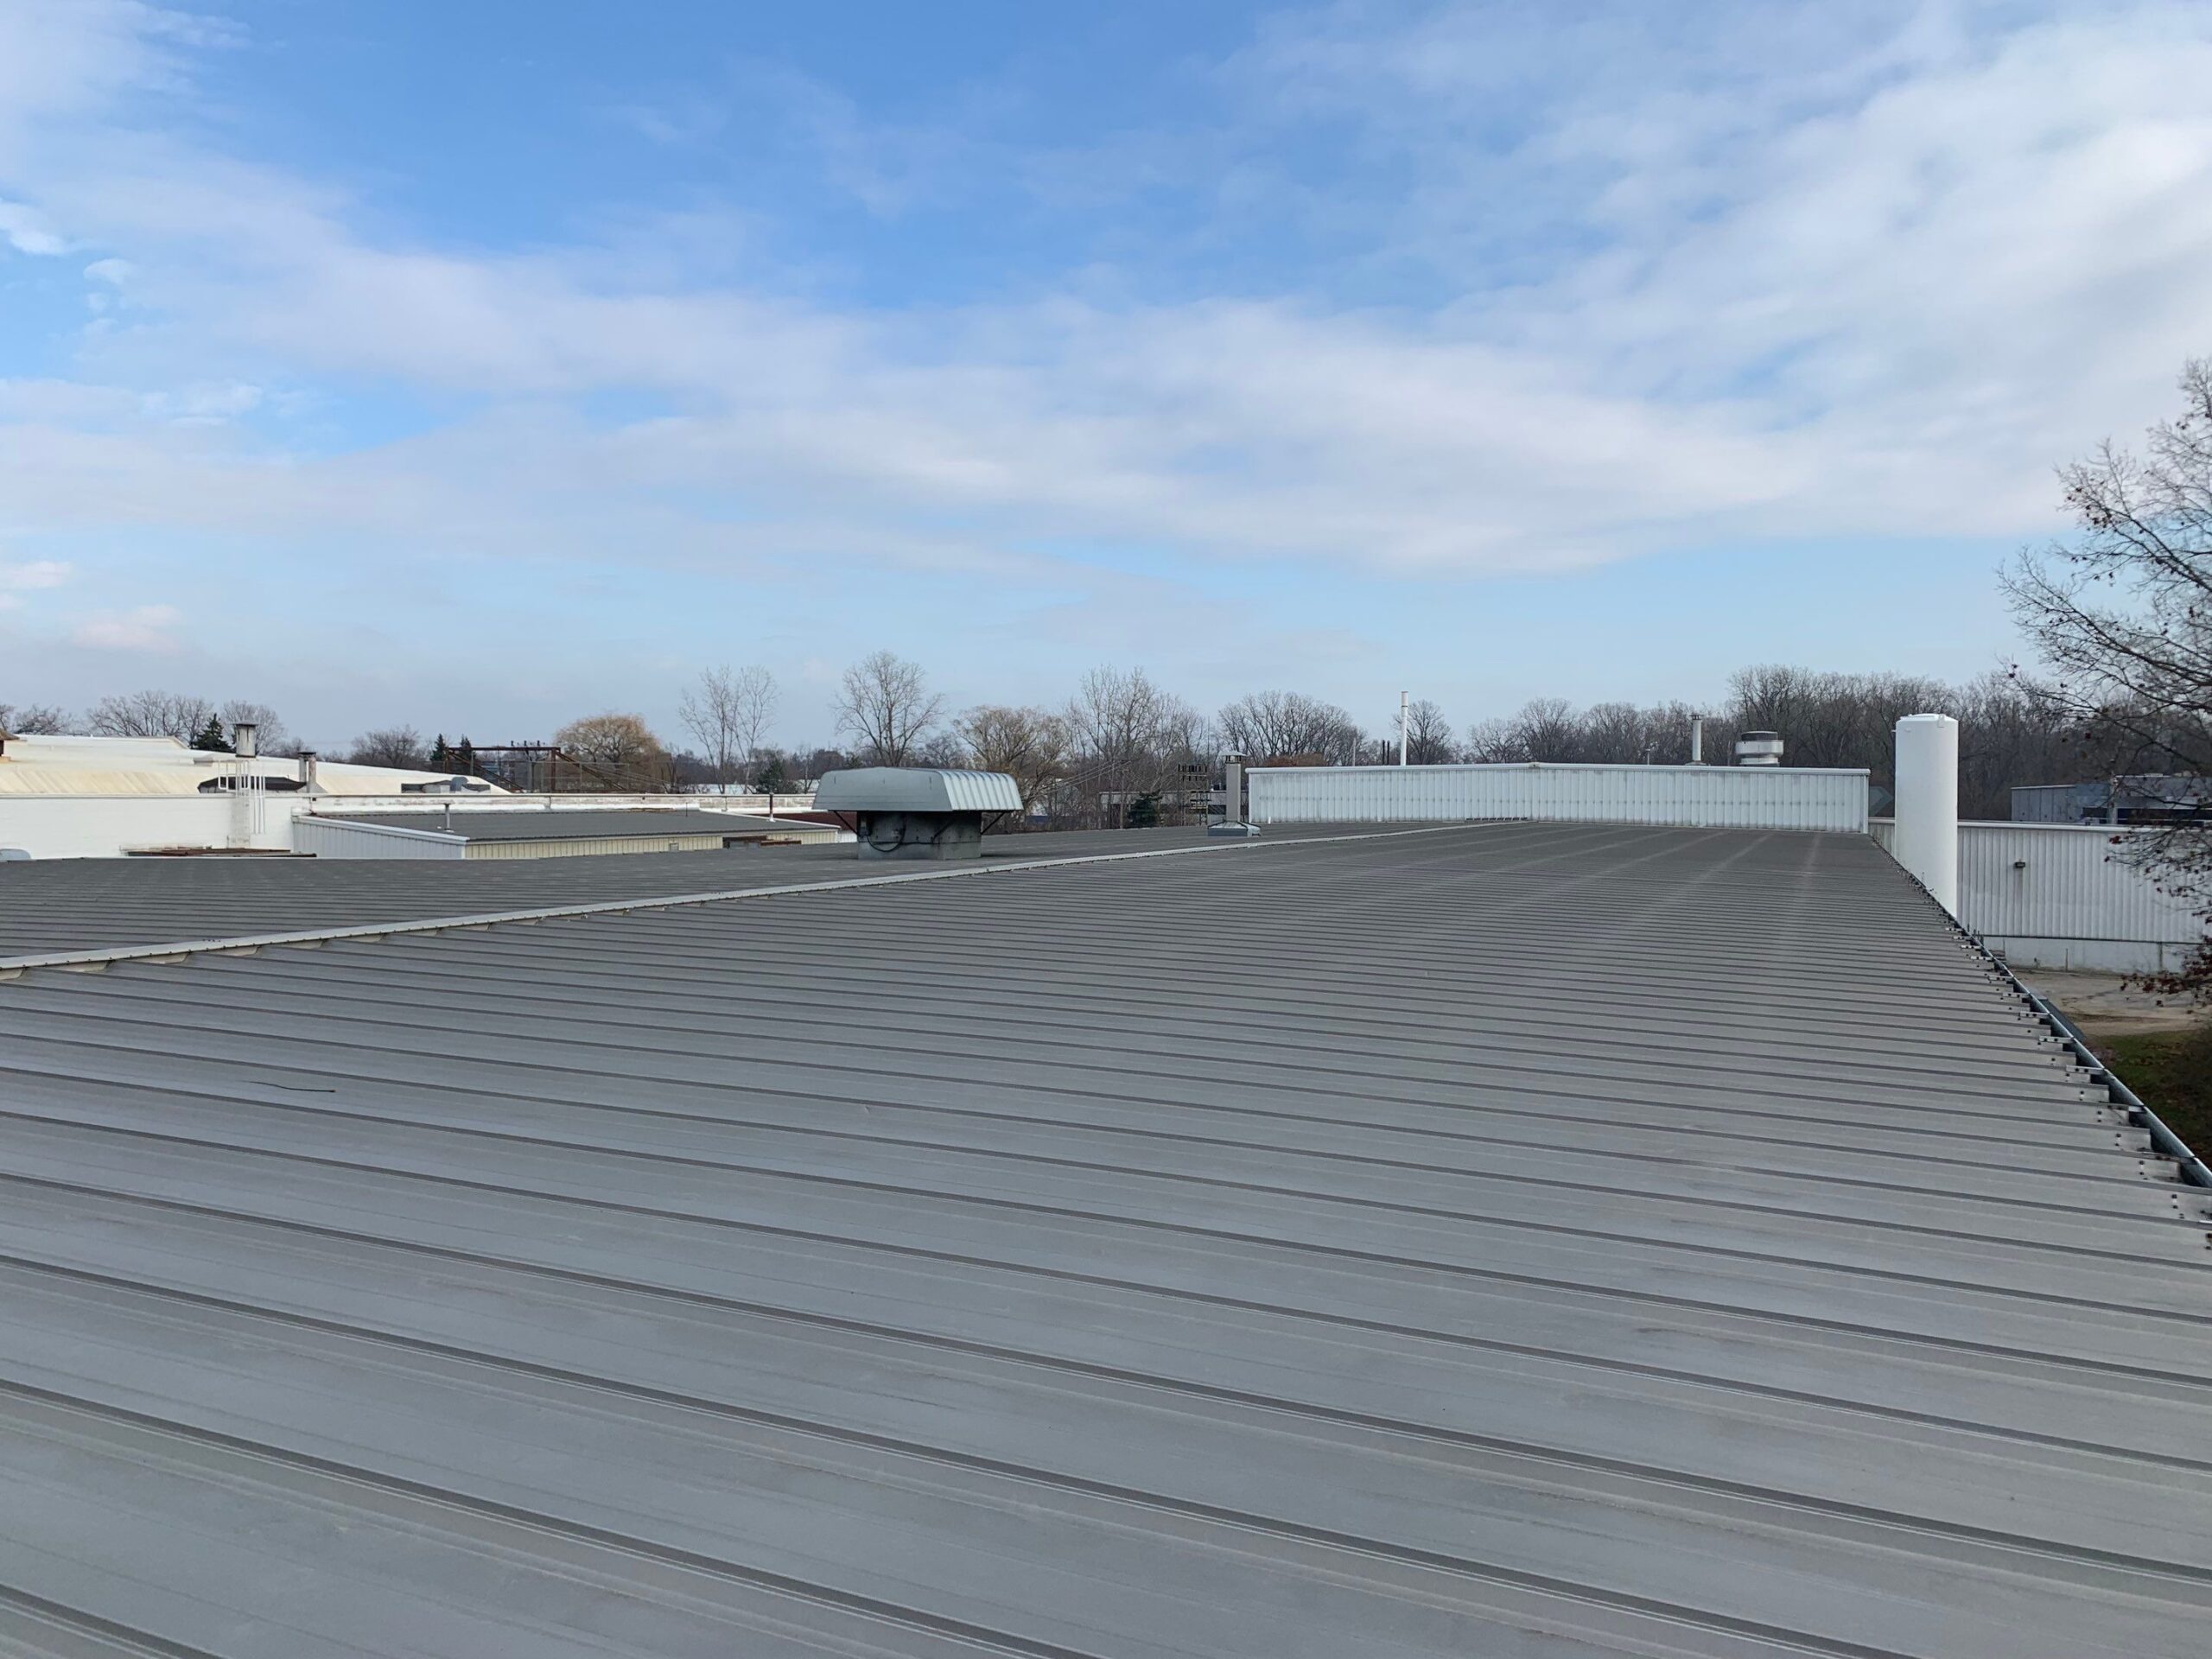 How to Save Money on Your Commercial Roof by Recycling In Place